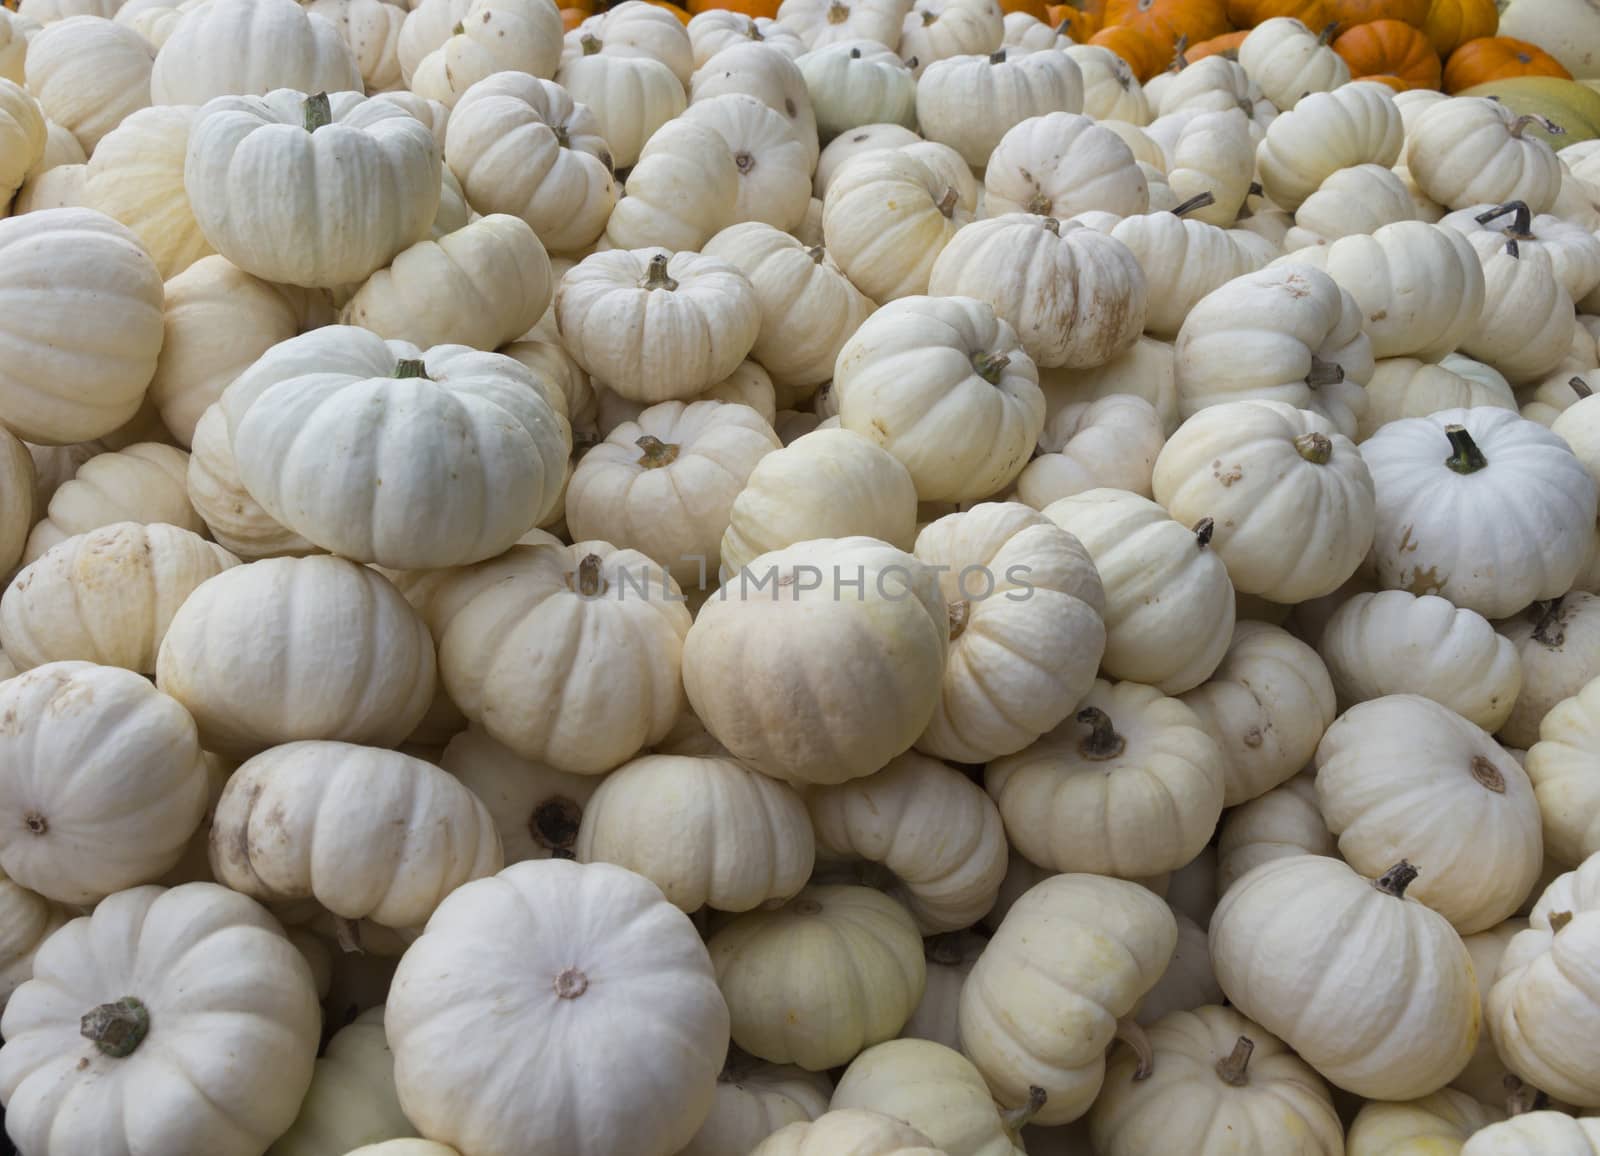 White pumpkin stand at a local farmer's market with yellow-orange coloured pumpkins in the background